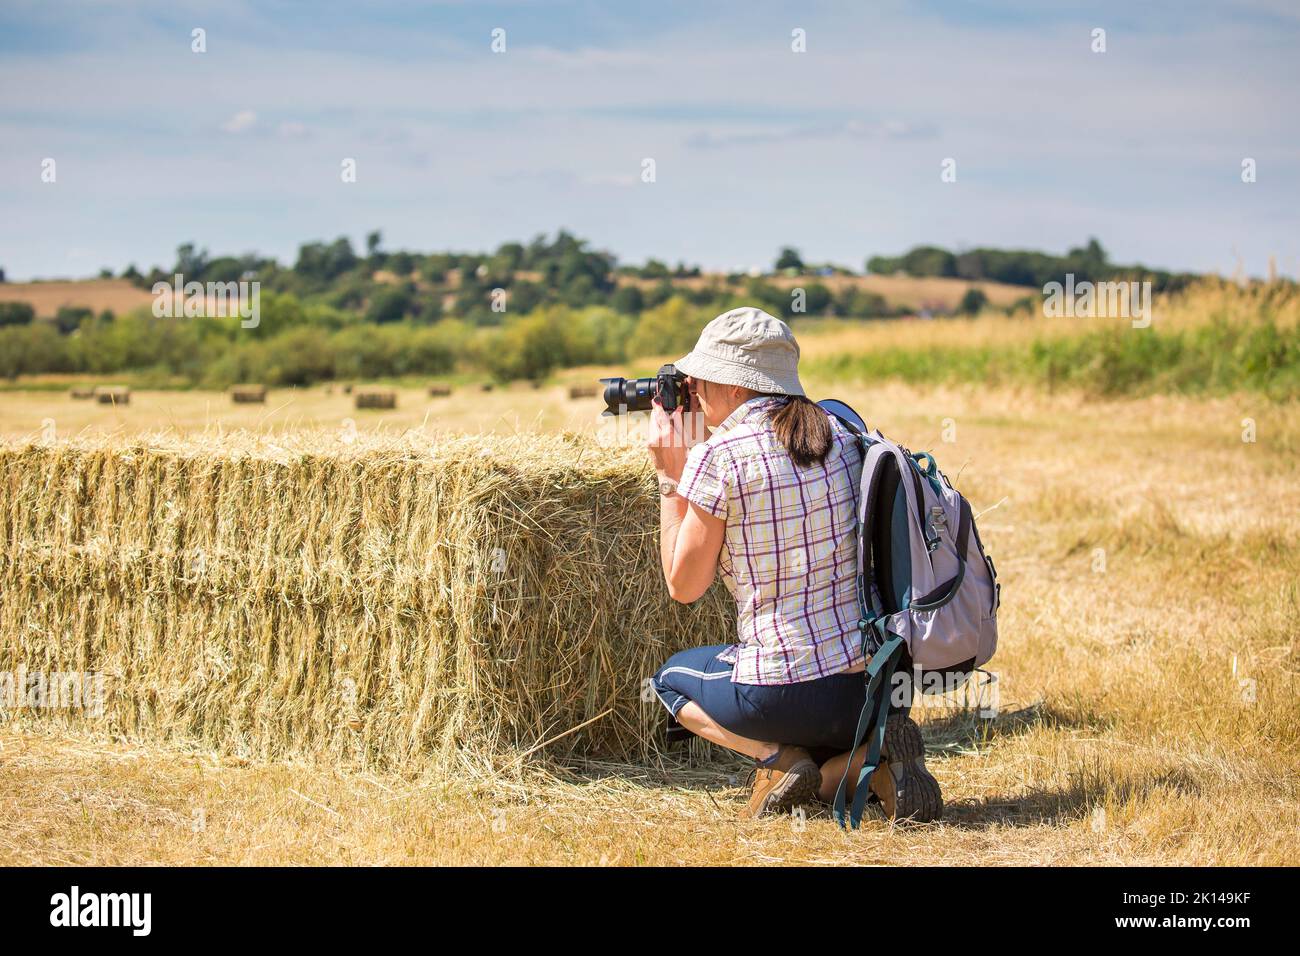 Rear view of a woman photographer kneeling by a hay bale taking photographs. The weather is hot and sunny with some cloud. Stock Photo